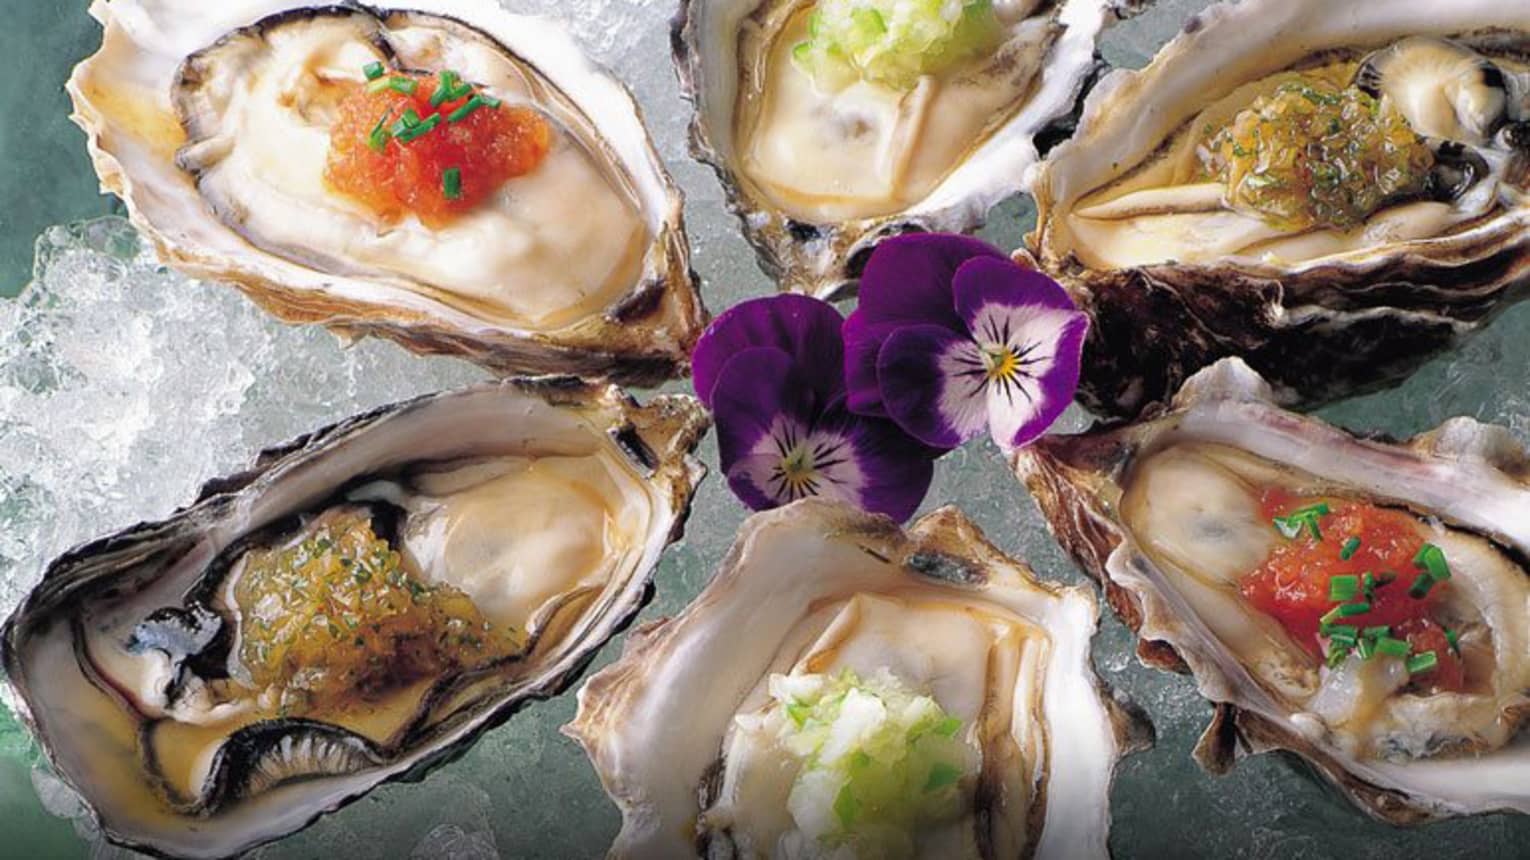 Raw oysters with Nobu Sauces and purple flowers on ice platter